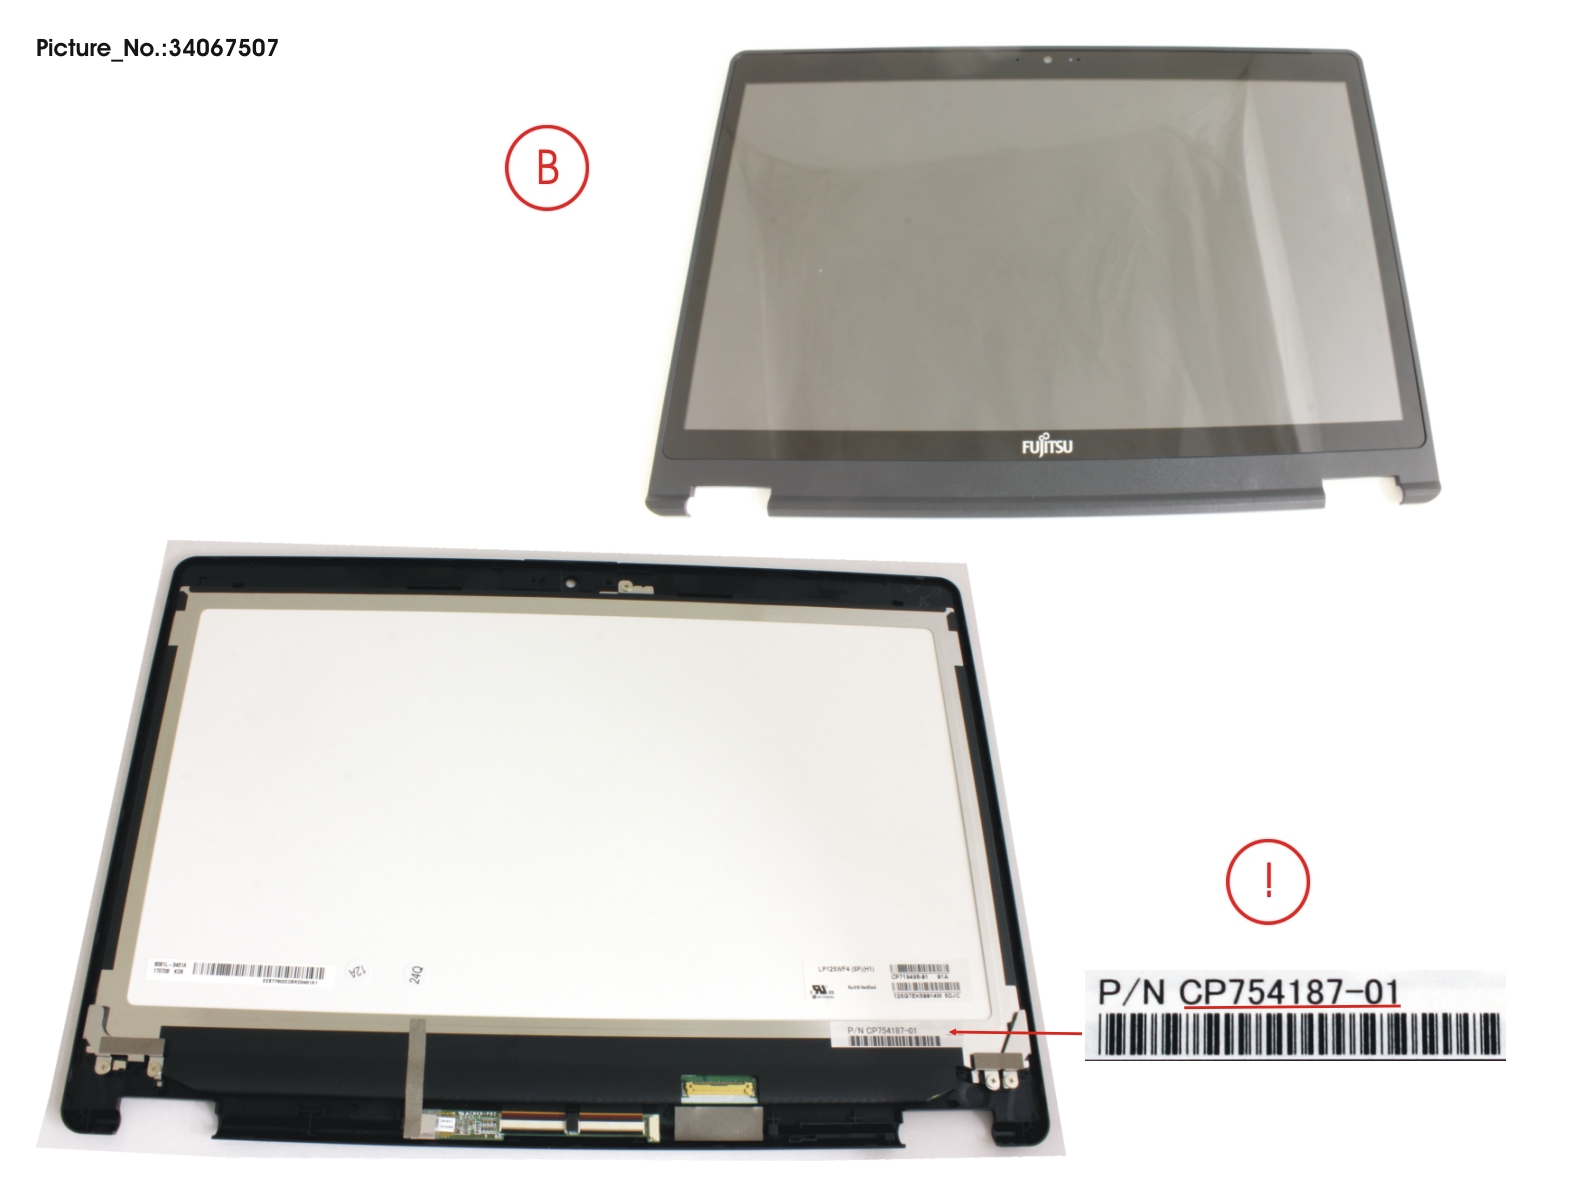 LCD ASSY FHD, G INCL.TOUCHPANEL